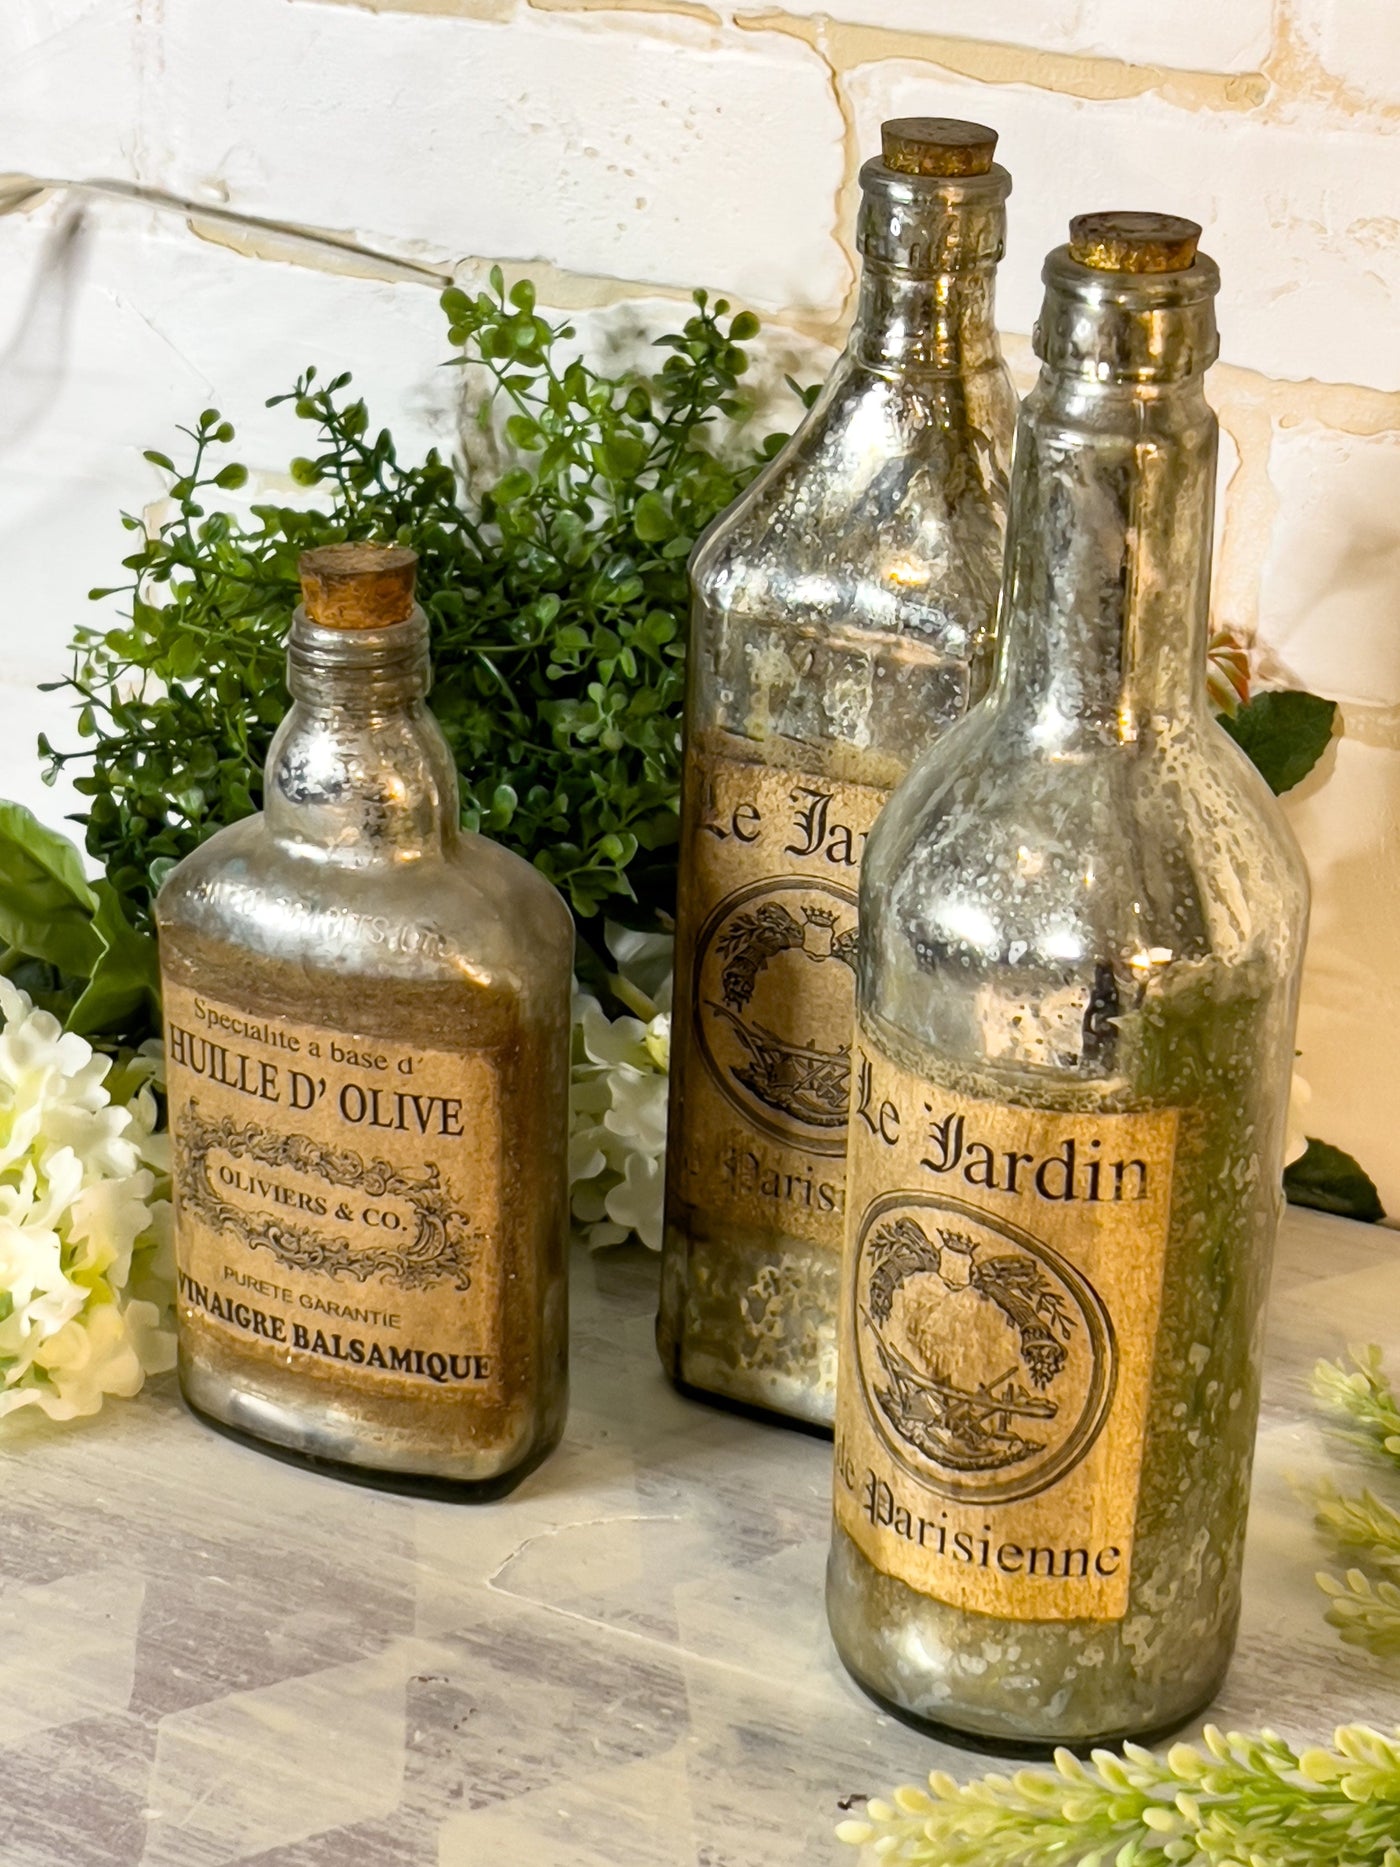 MERCURY GLASS BOTTLES - VINTAGE INSPIRED Revive In Style Vintage Furniture Painted Refinished Redesign Beautiful One of a Kind Artistic Antique Unique Home Decor Interior Design French Country Shabby Chic Cottage Farmhouse Grandmillenial Coastal Chalk Paint Metallic Glam Eclectic Quality Dovetailed Rustic Furniture Painter Pinterest Bedroom Living Room Entryway Kitchen Home Trends House Styles Decorating ideas